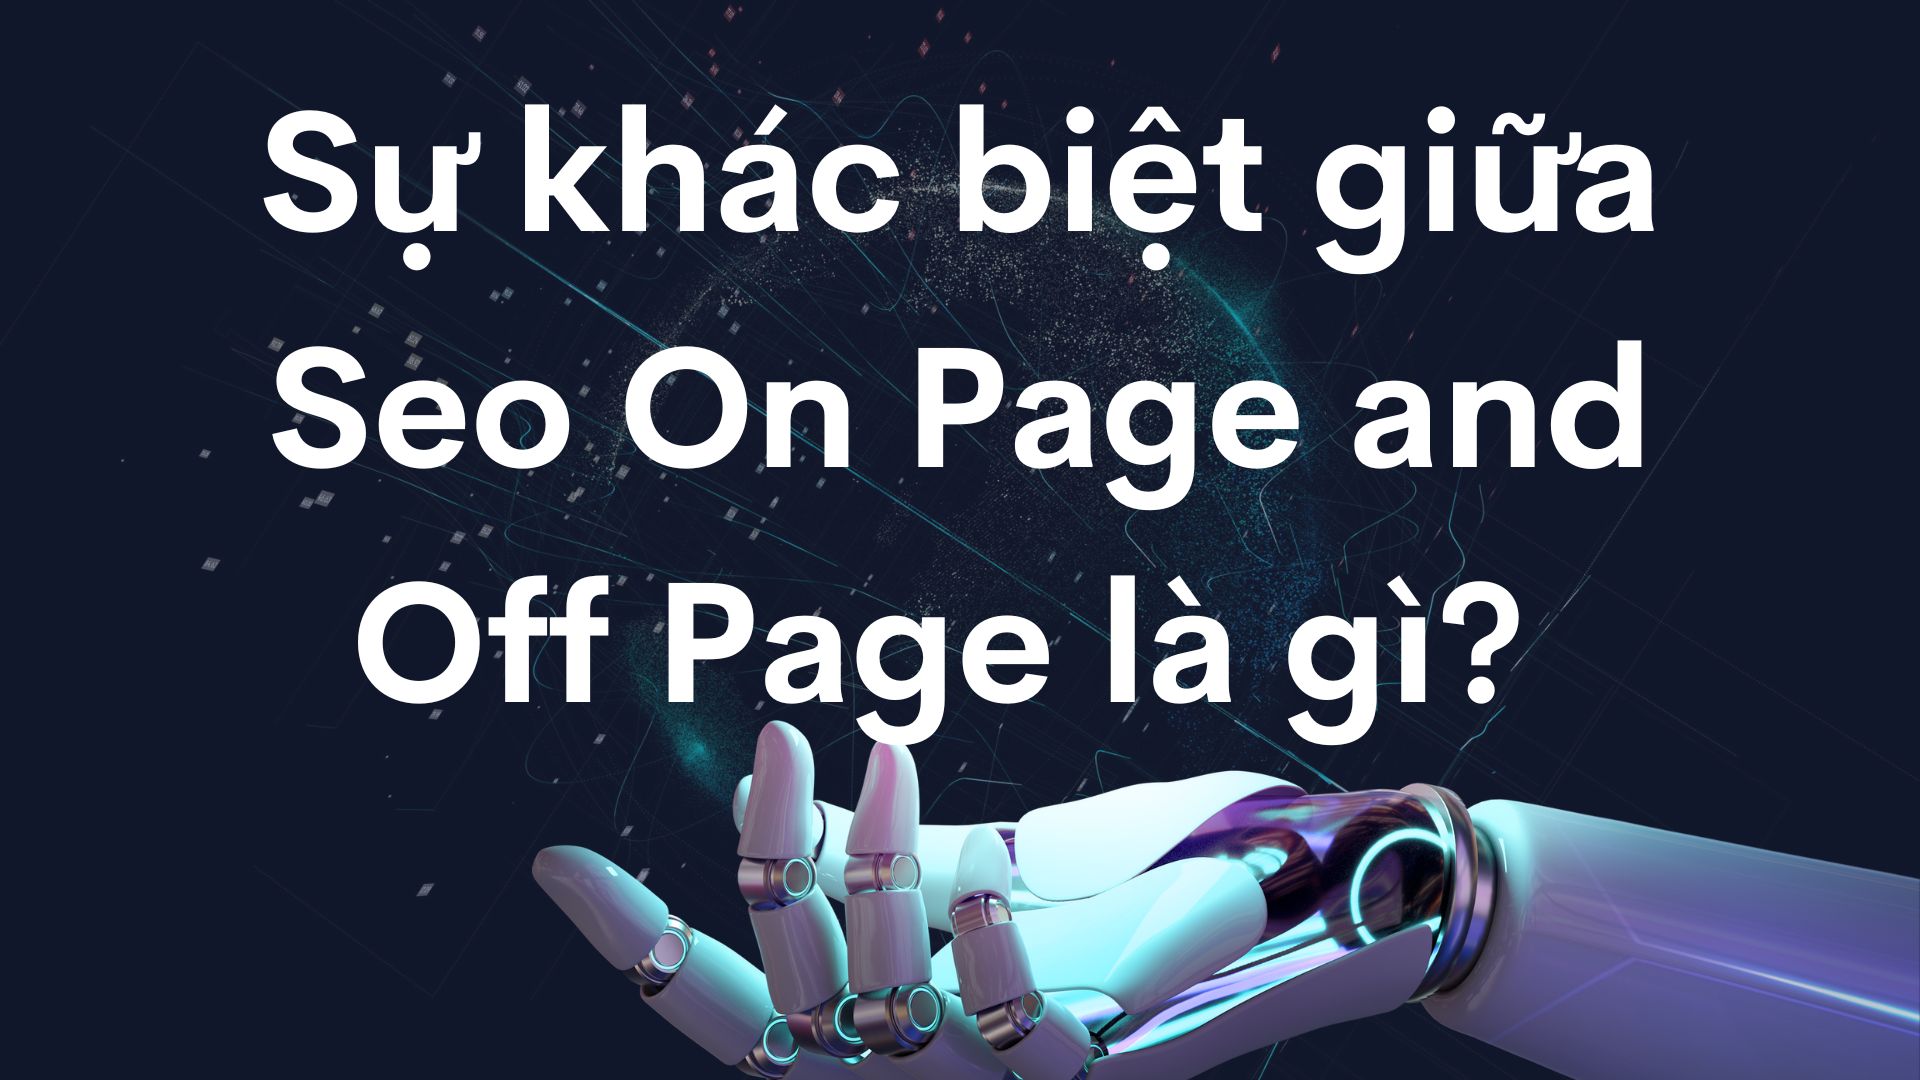 What is the difference between SEO On Page and Off Page SEO?